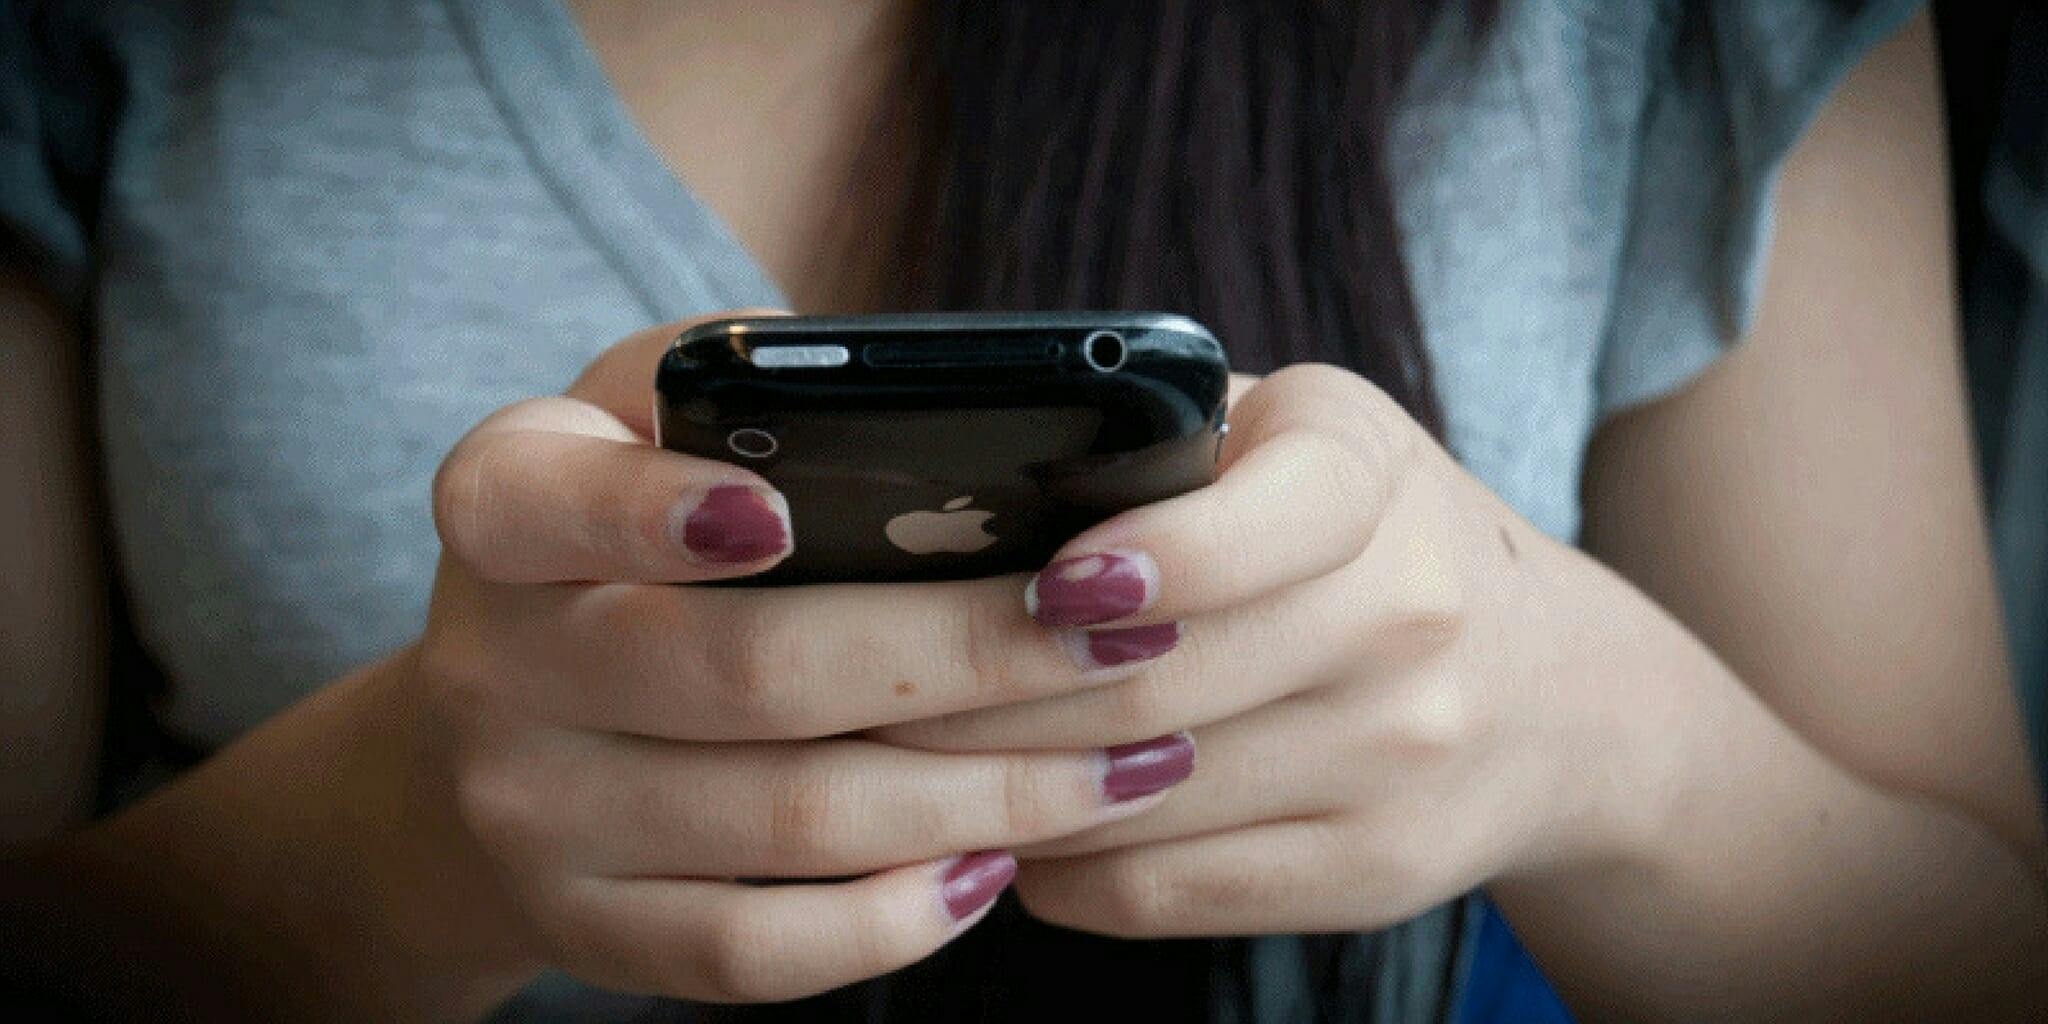 Teen charged with child pornography after texting her own nude selfie